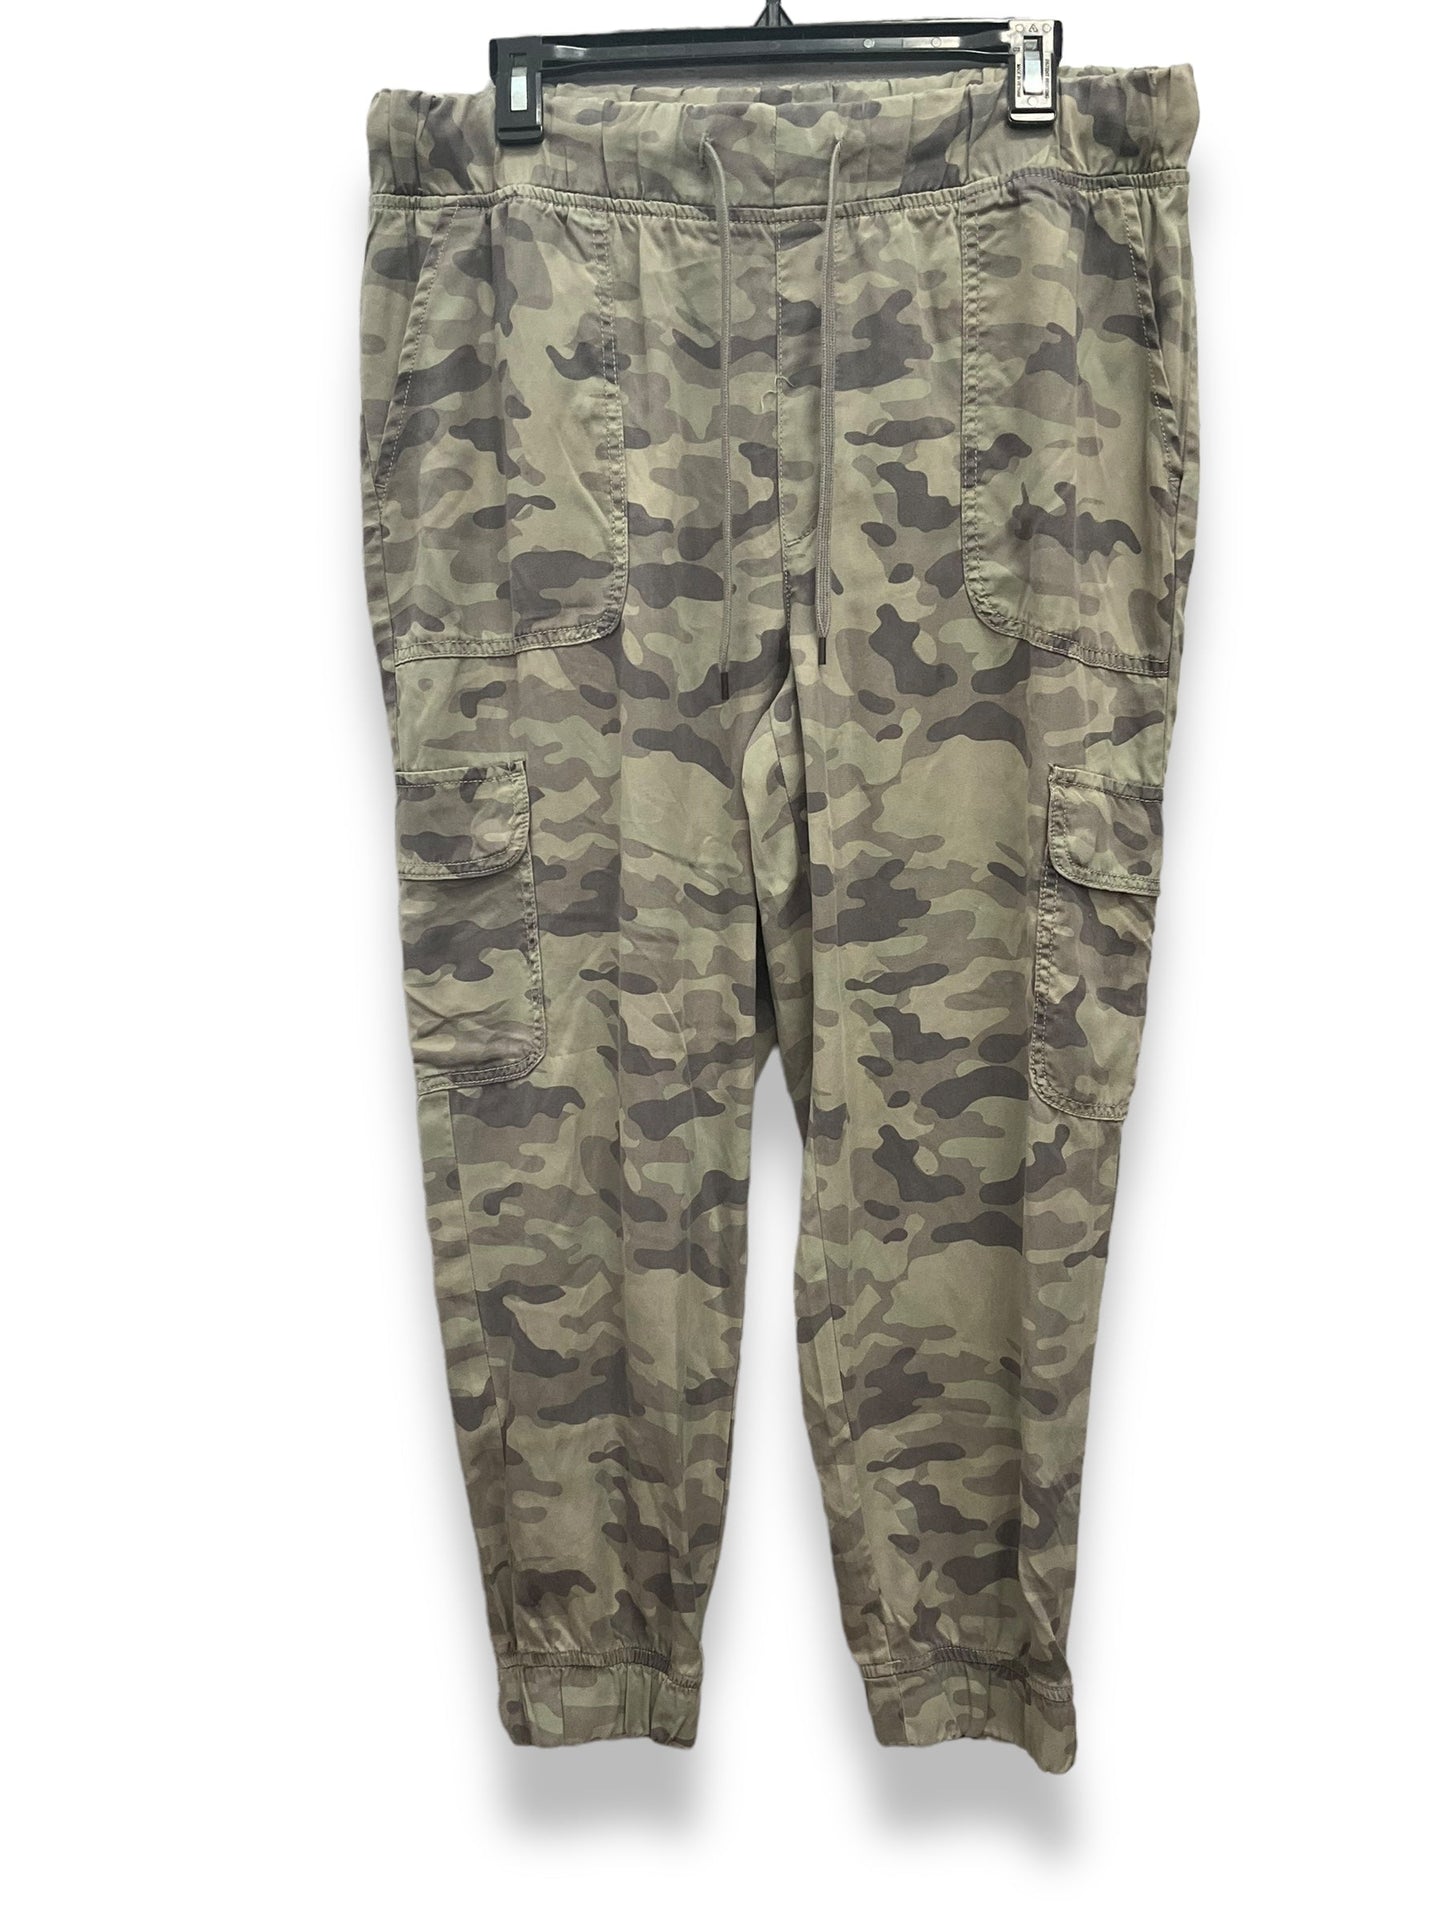 Camouflage Print Pants Cargo & Utility American Eagle, Size L